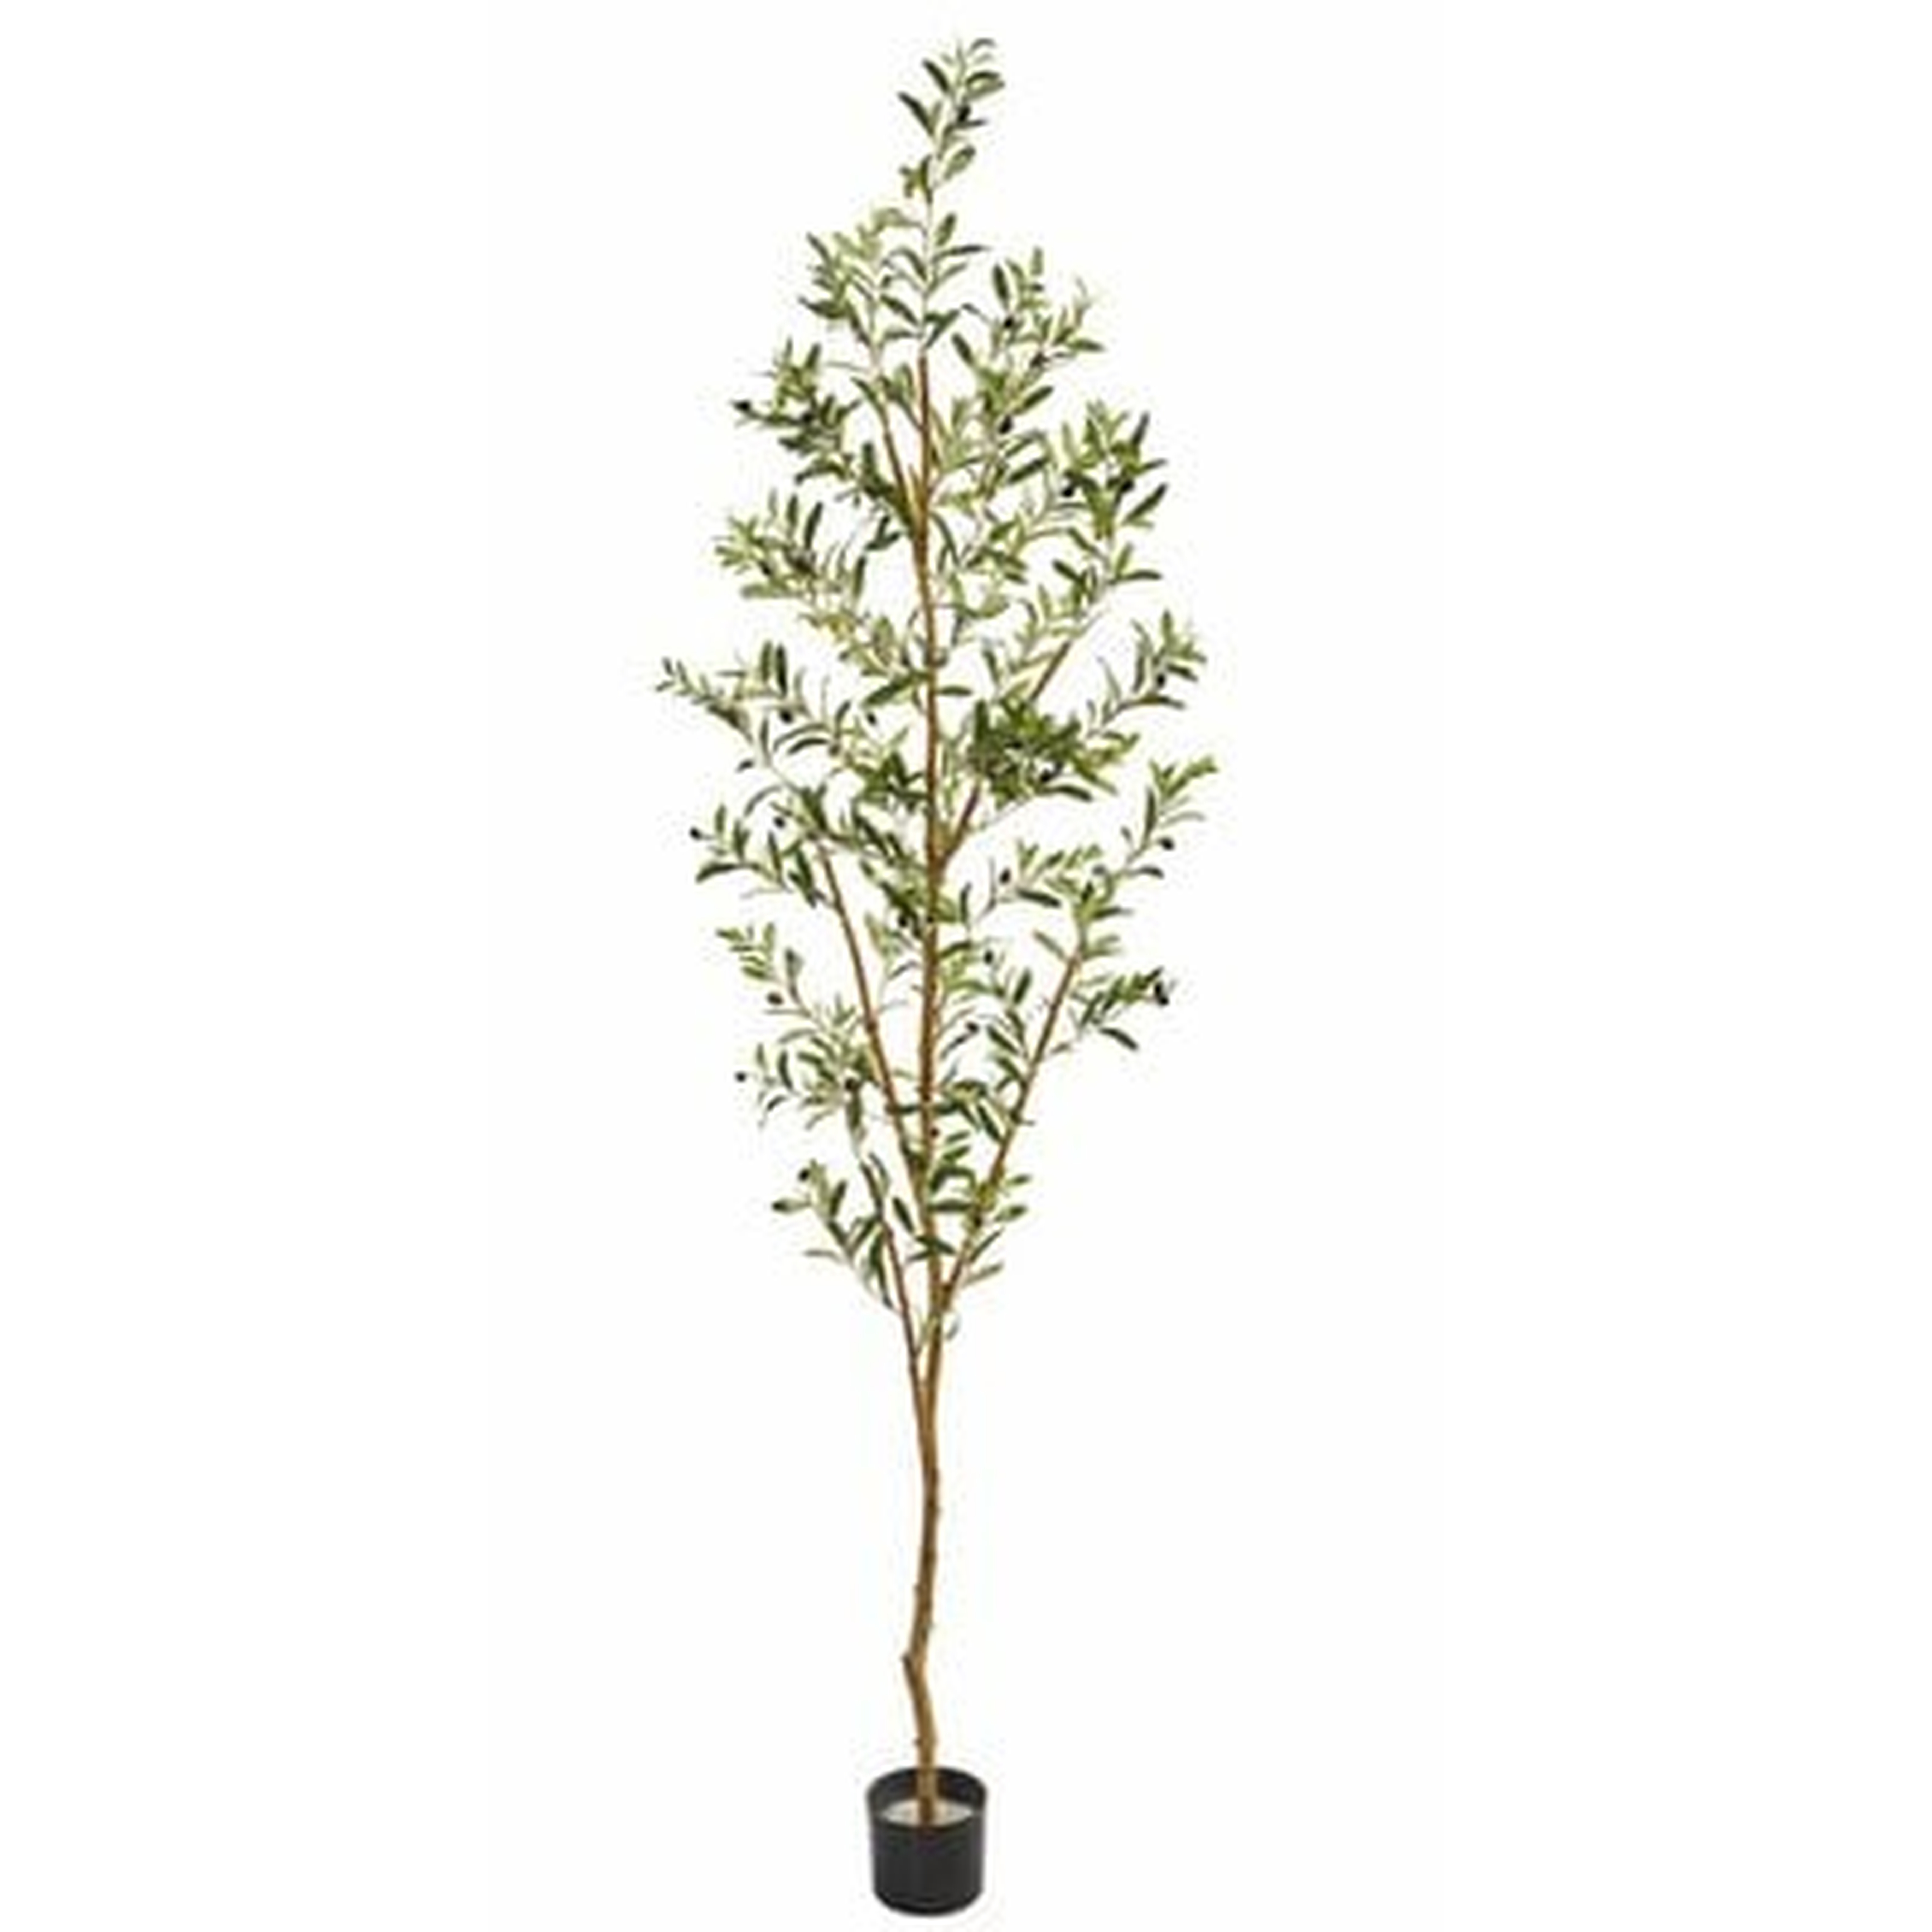 Artificial Olive Tree in Planter - Wayfair